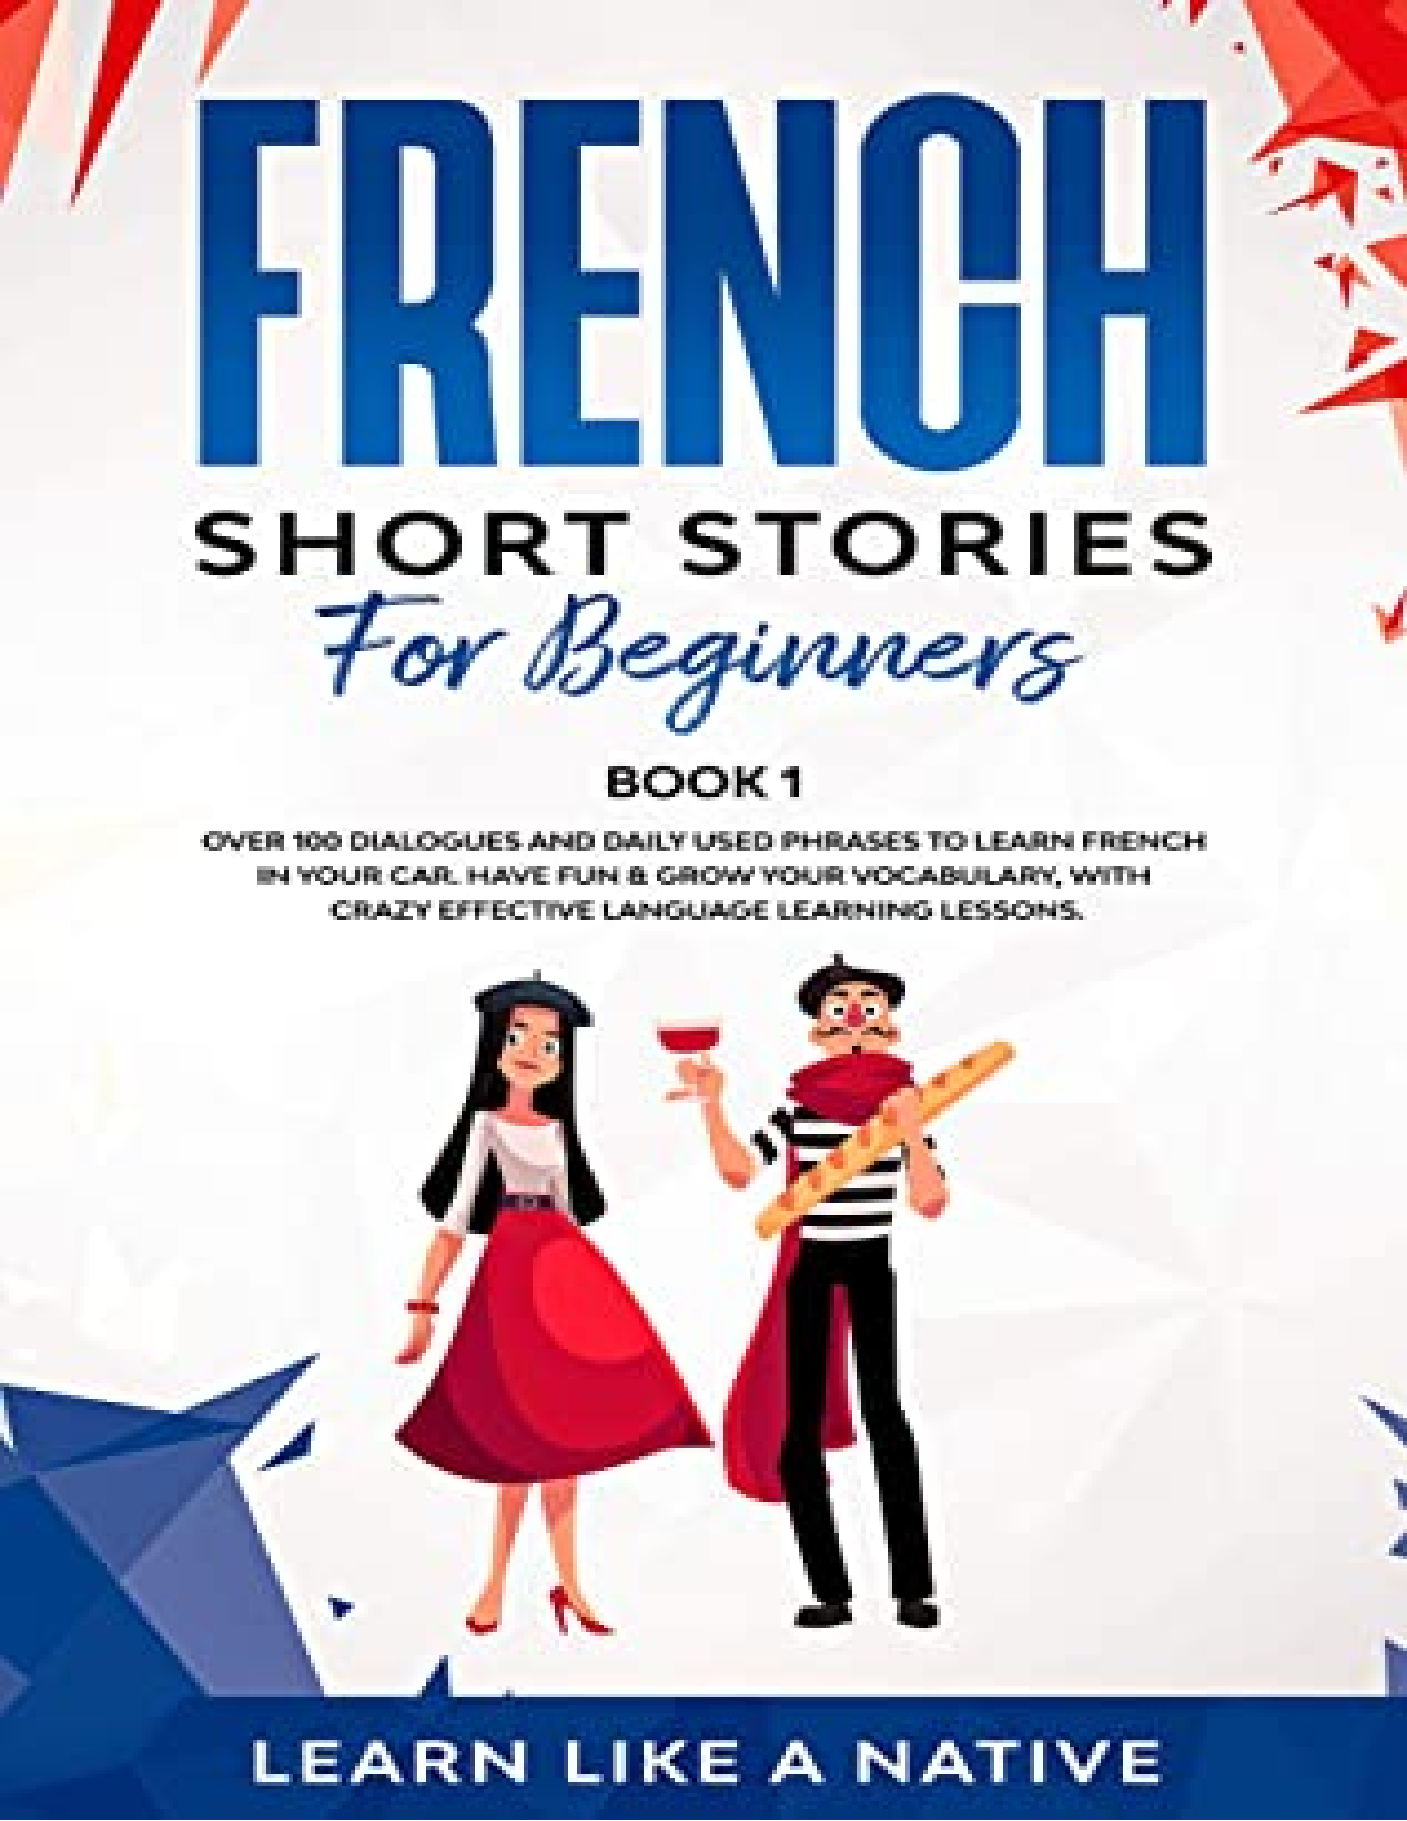 Rich Results on Google's SERP when searching for 'French Short Stories for Beginners Book 1'